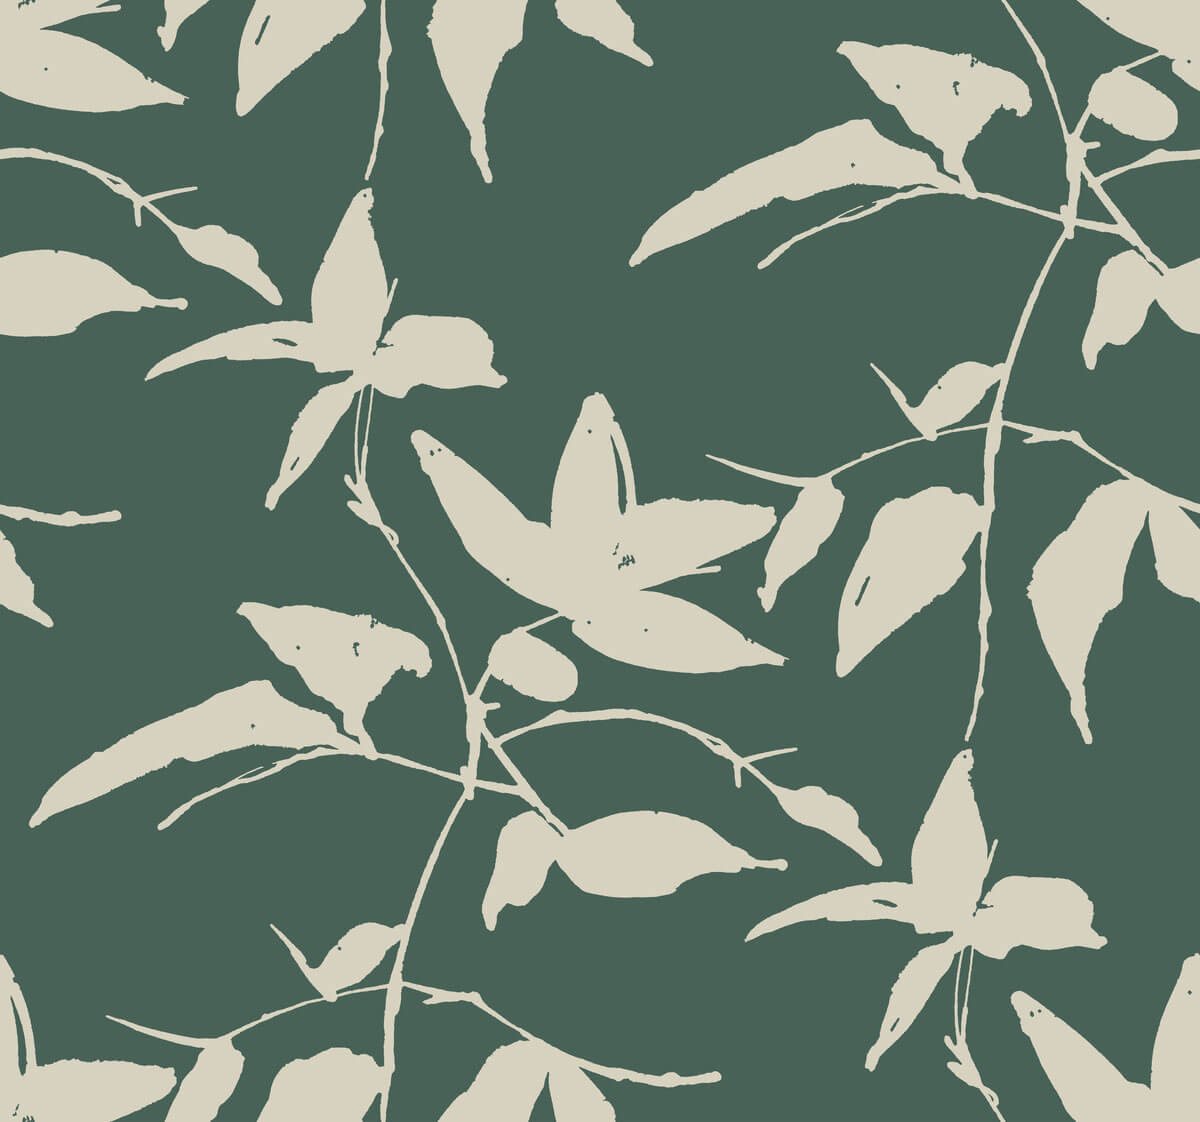 Ronald Redding Persimmon Leaf Wallpaper - SAMPLE ONLY